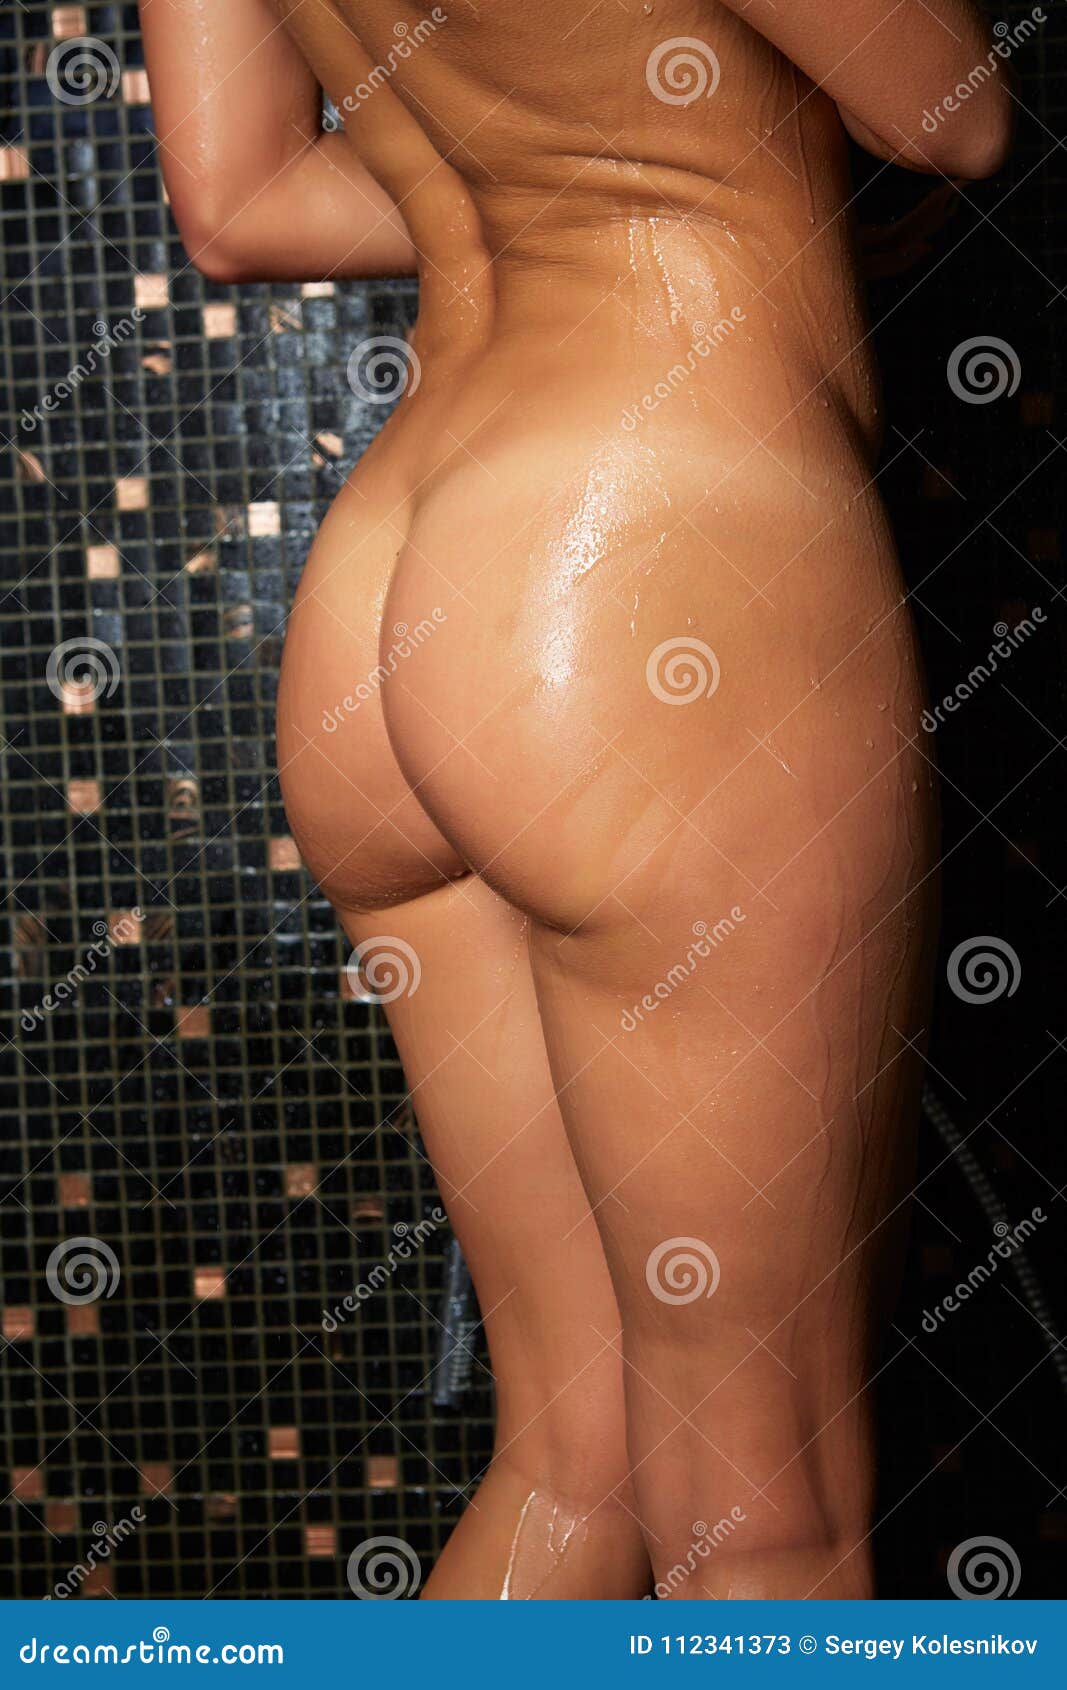 white girls butts in shower xxx porn video pic